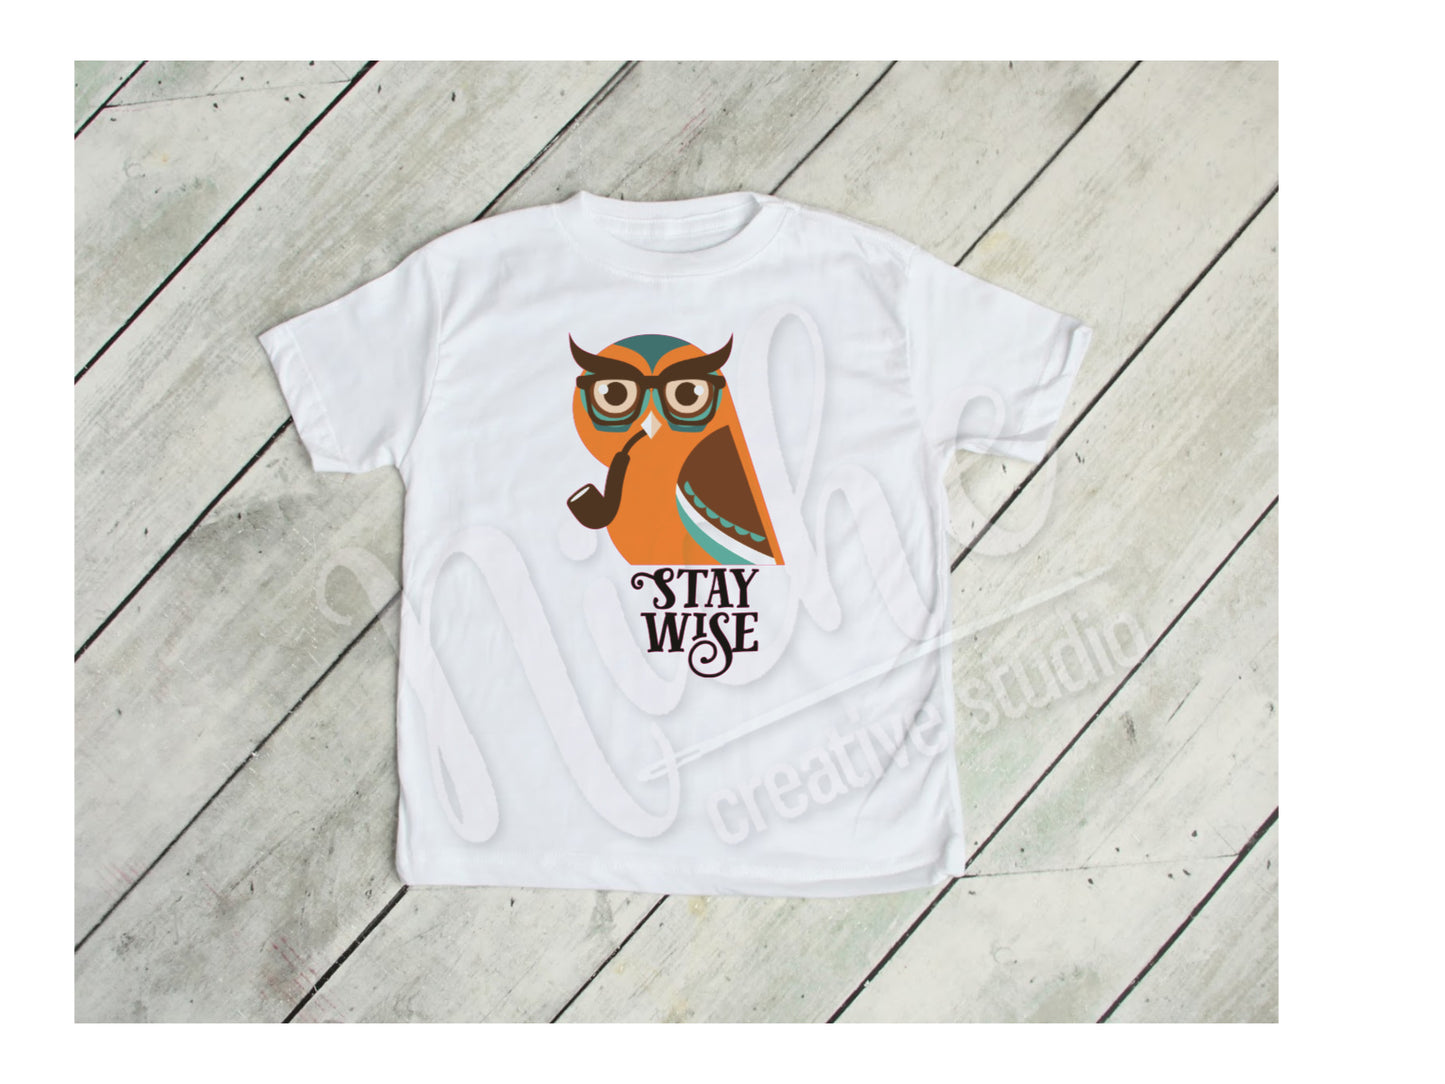 * Stay Wise Owl Decal